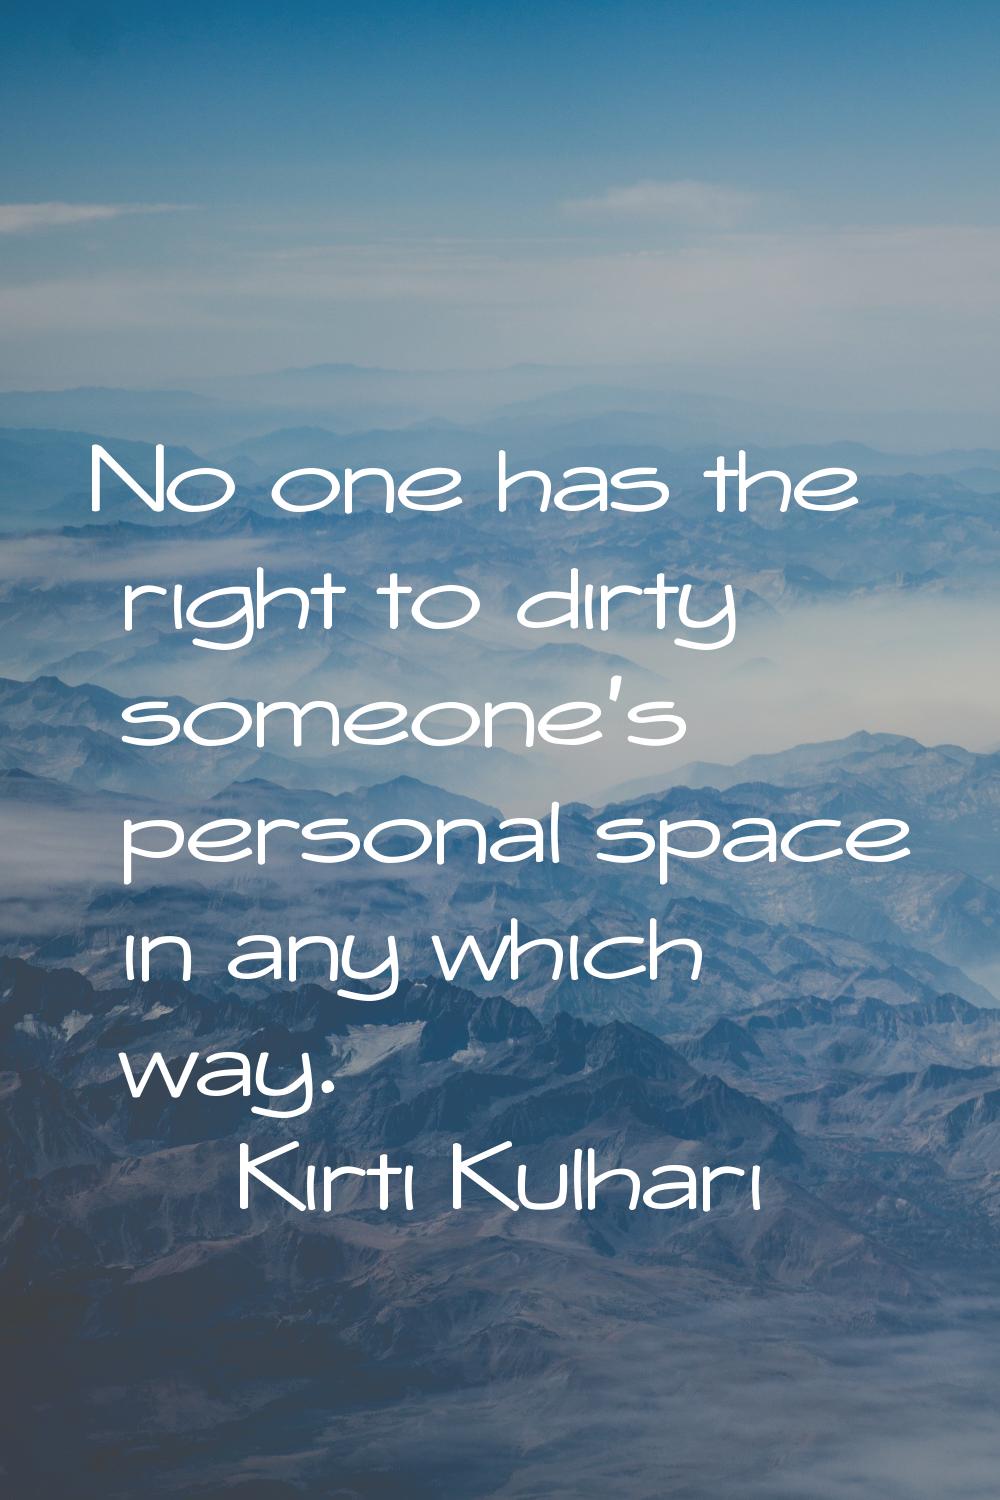 No one has the right to dirty someone's personal space in any which way.